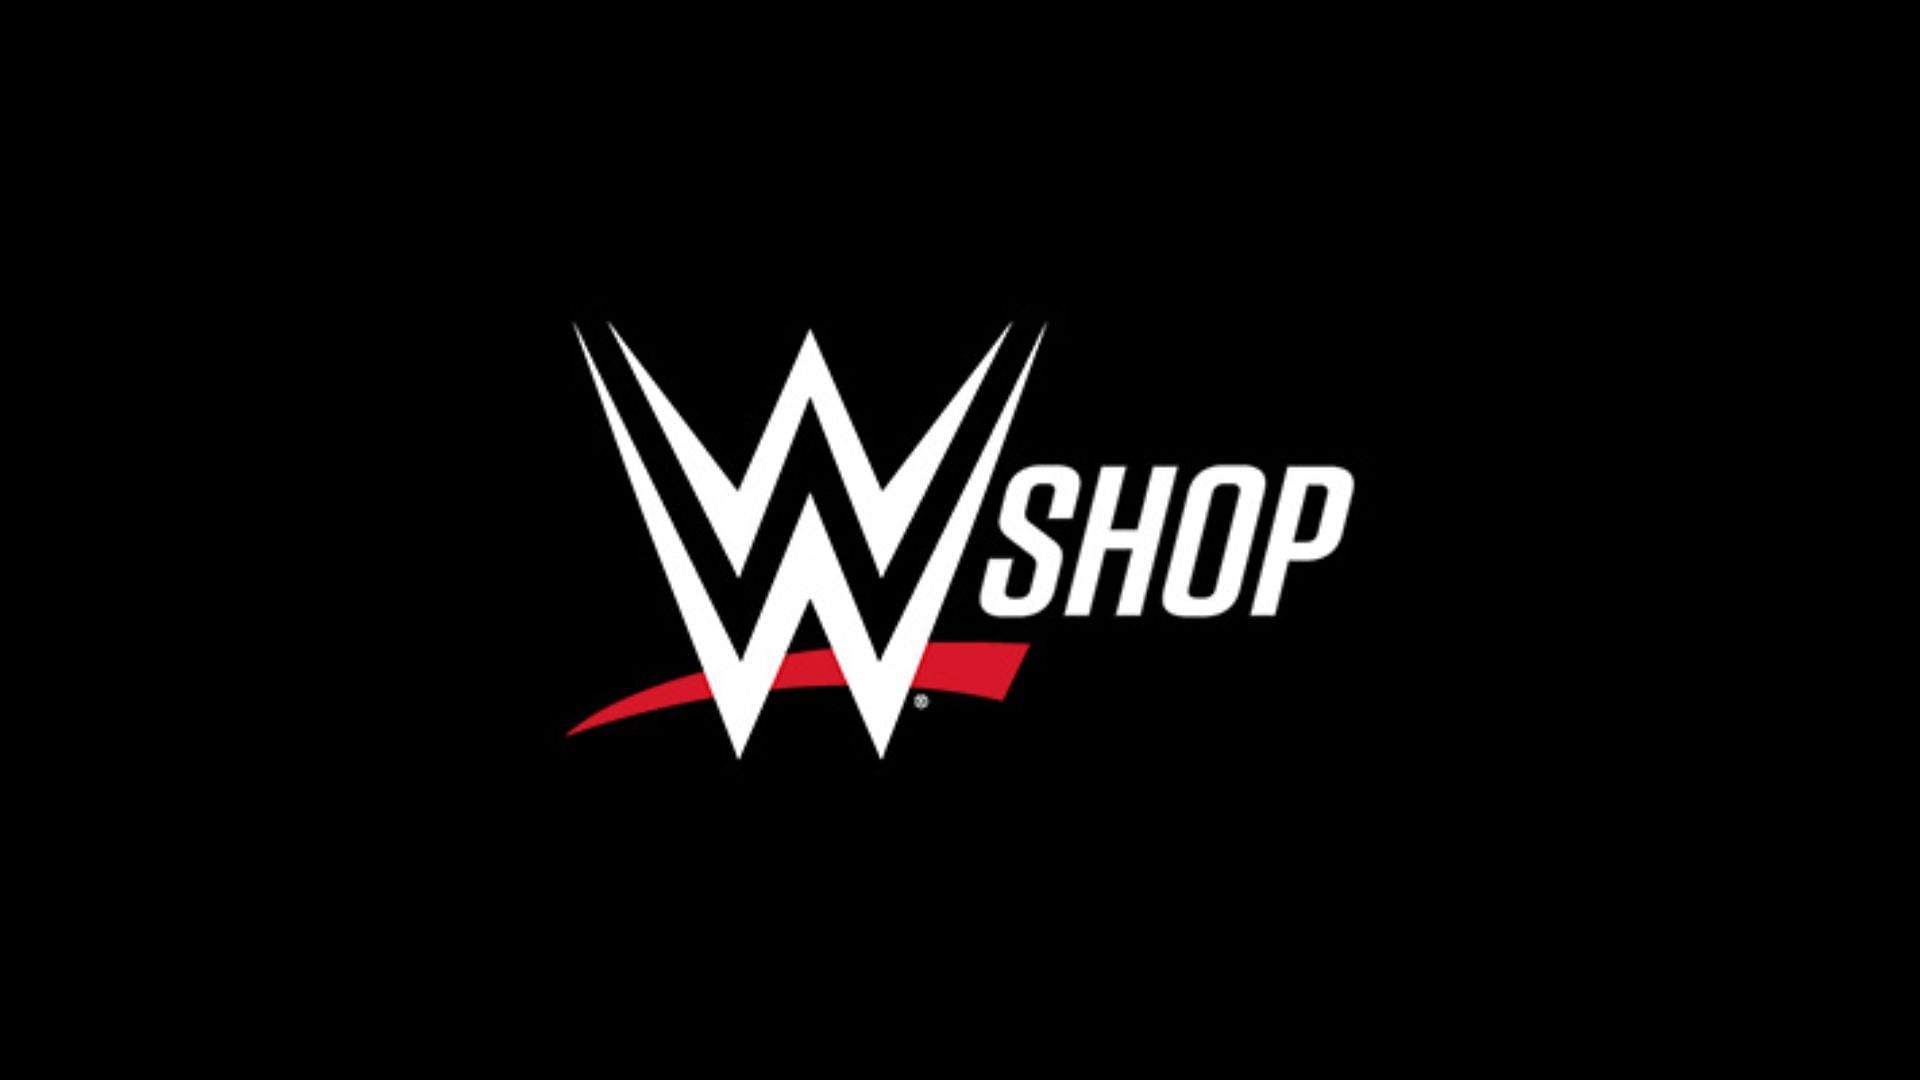 Hundreds of items are available on WWE Shop